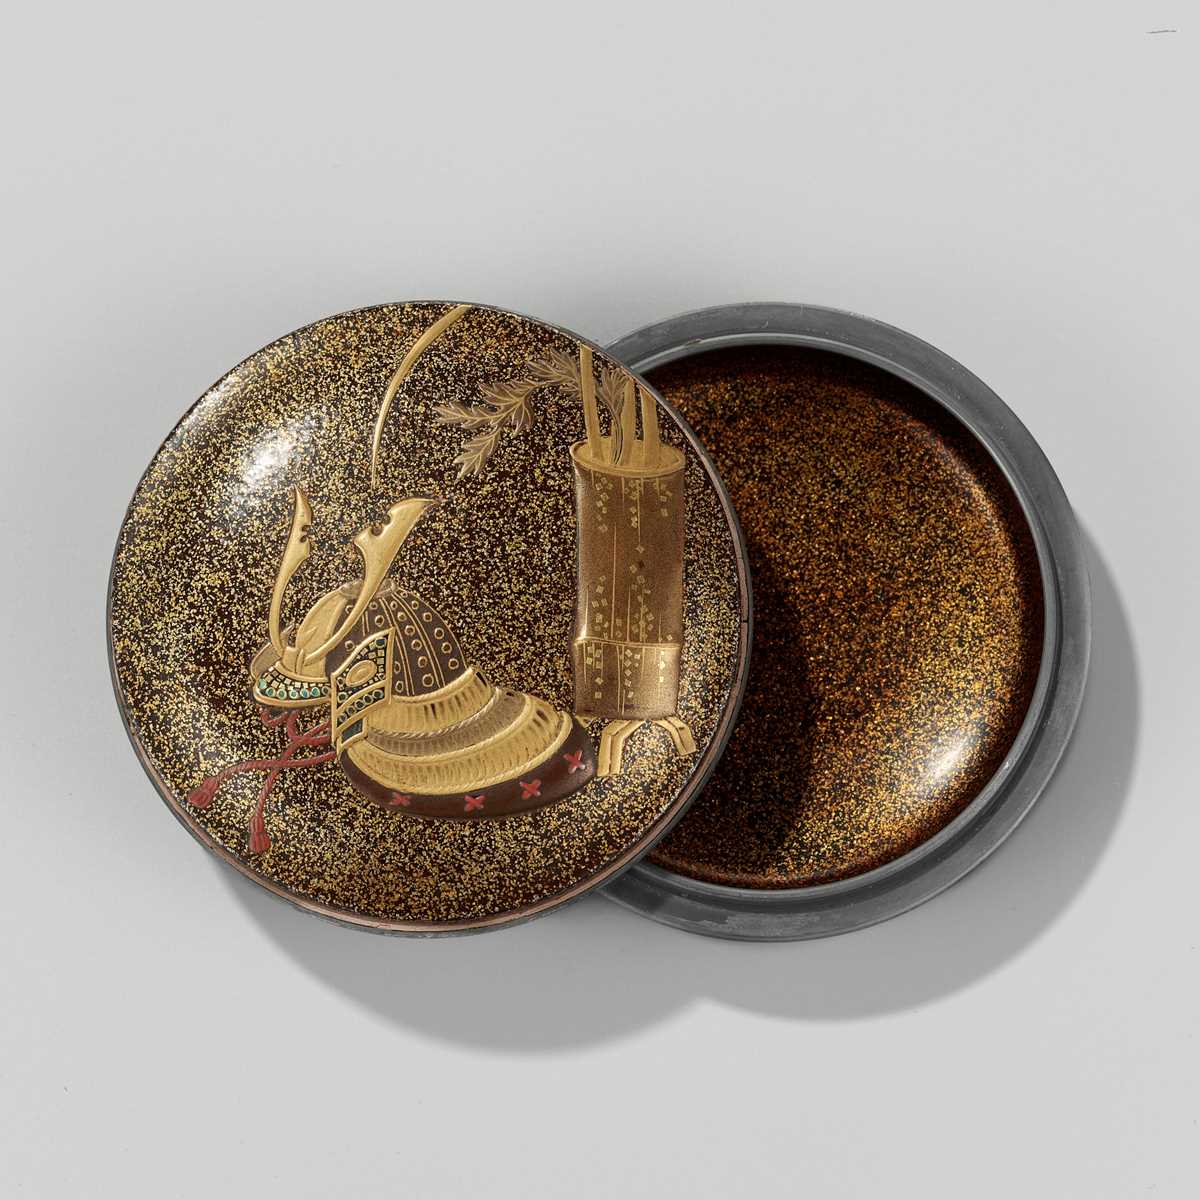 Lot 19 - A FINE LACQUER KOGO (INCENSE BOX) AND COVER WITH KABUTO AND BAMBOO HANAKAGO